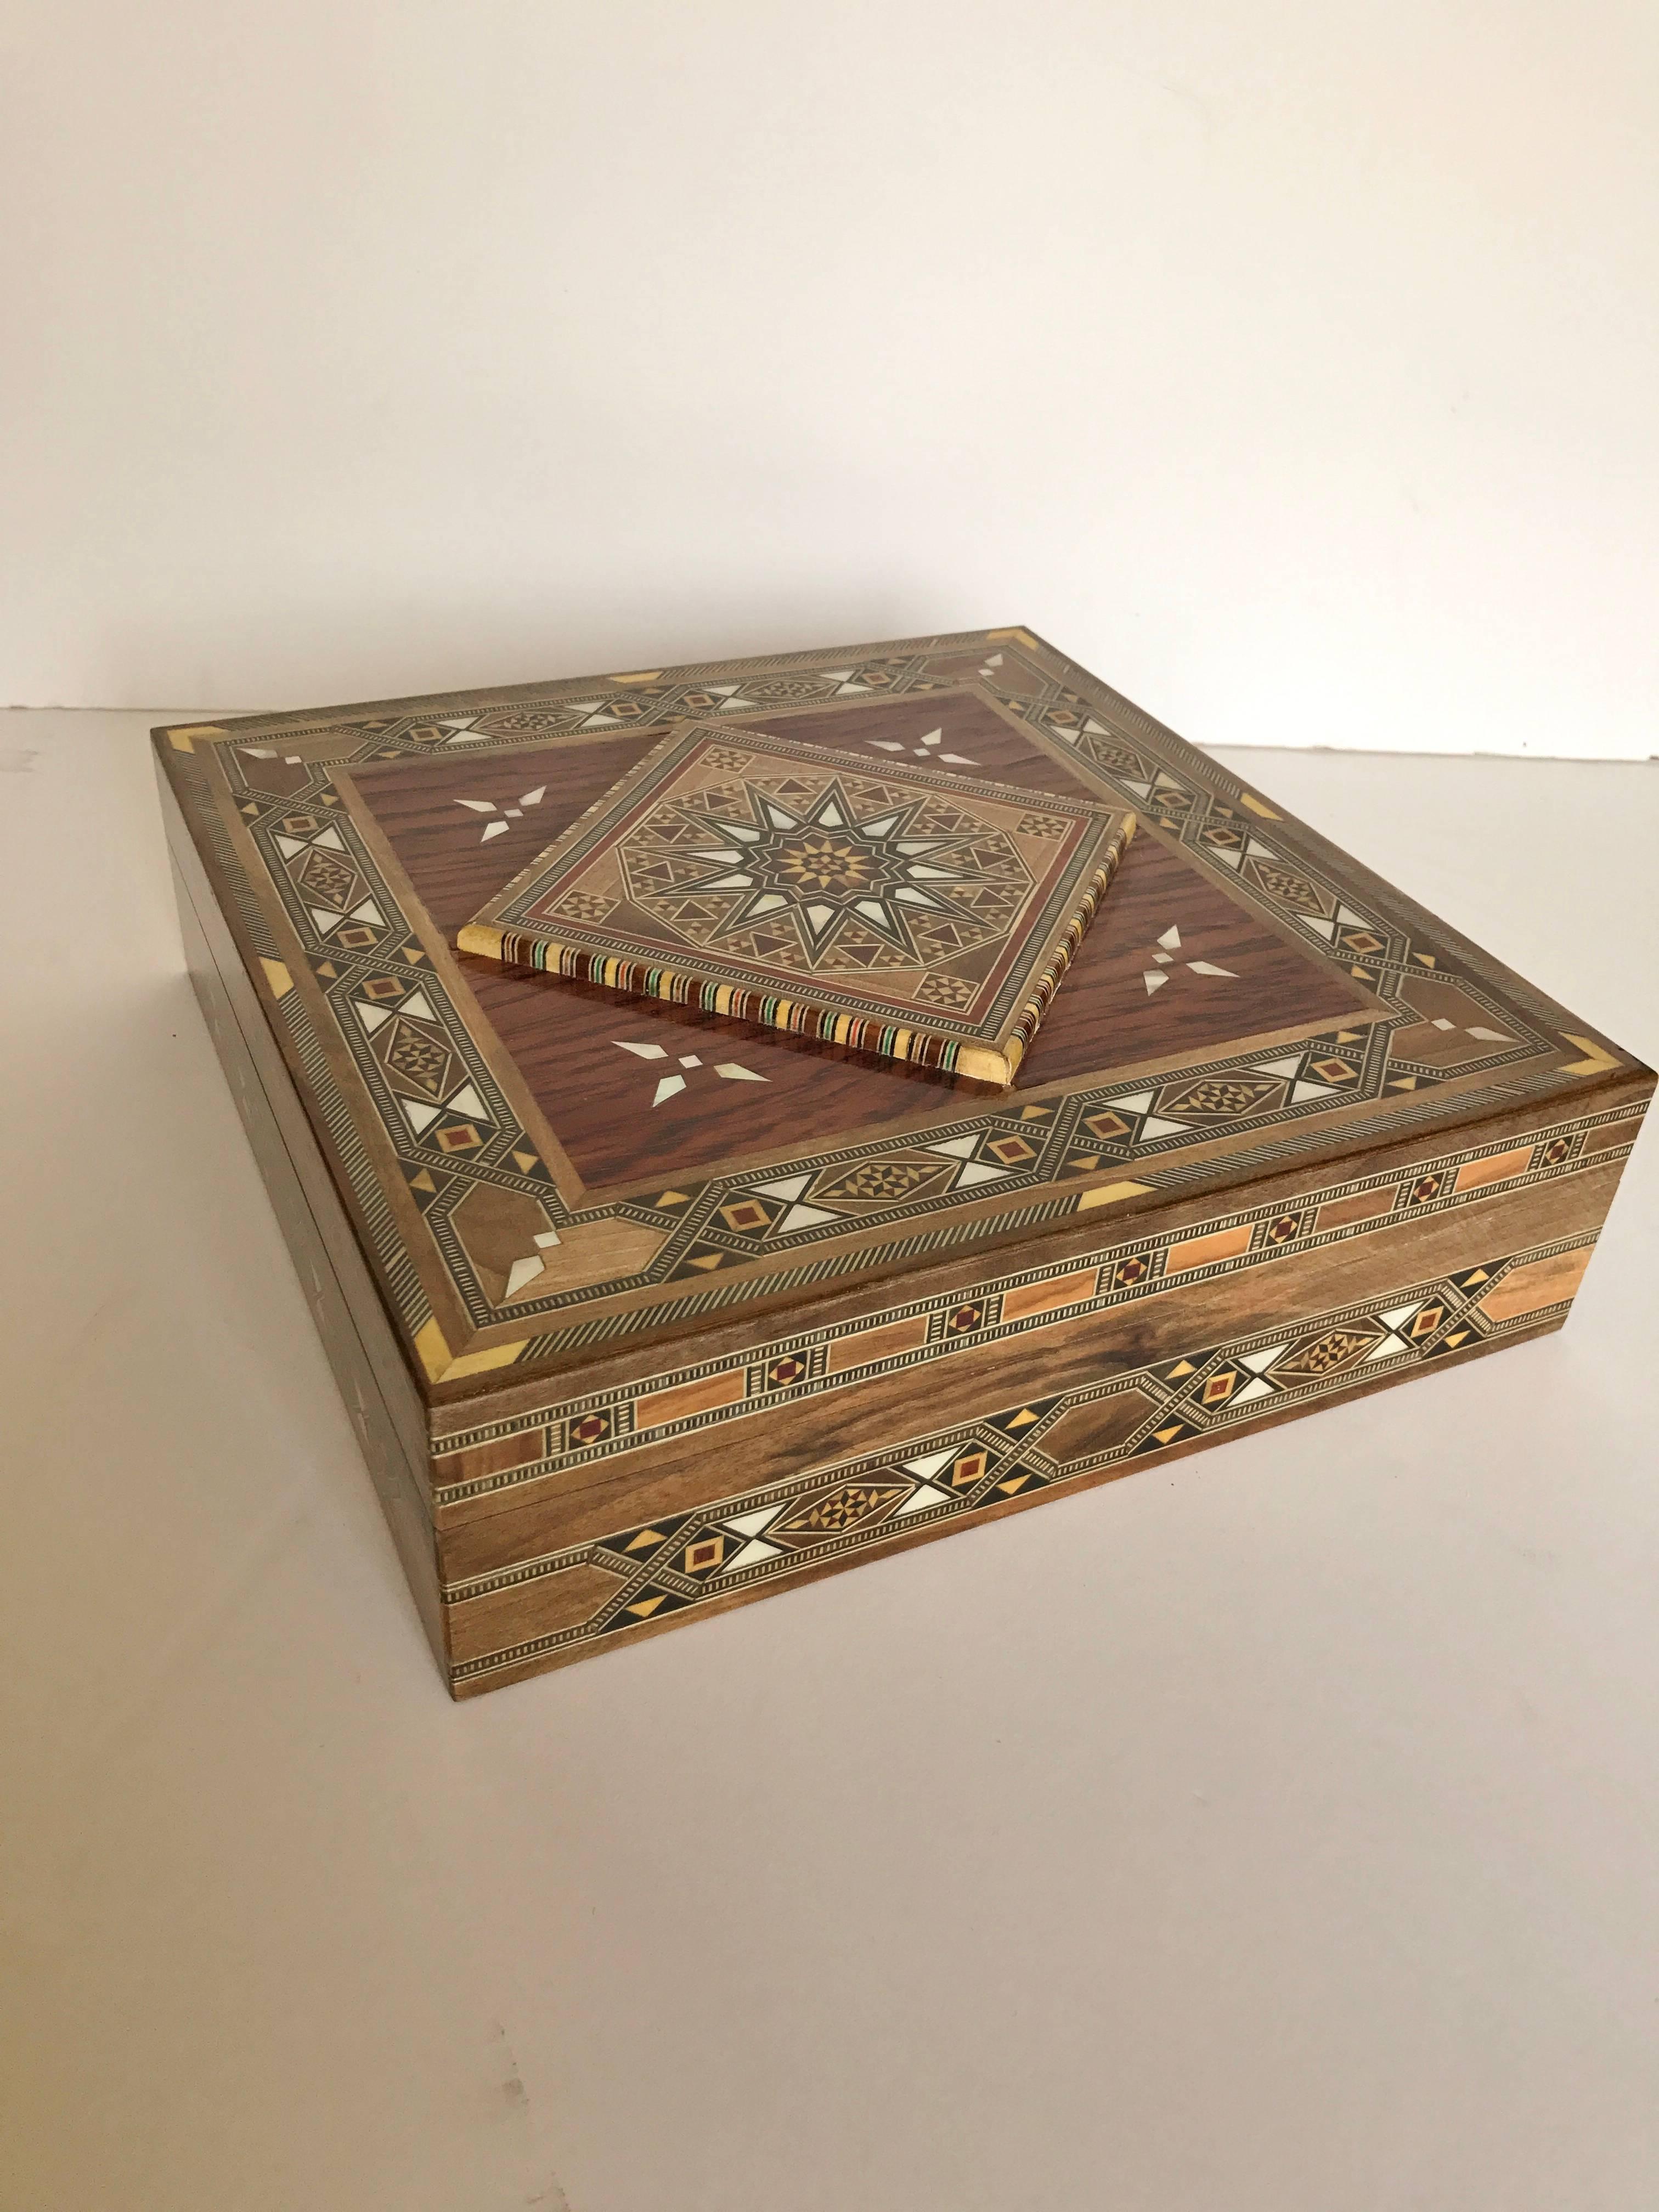 Syrian Walnut Wood Box Inlaid with Mother-of-Pearl, Cream Leather Lining 1